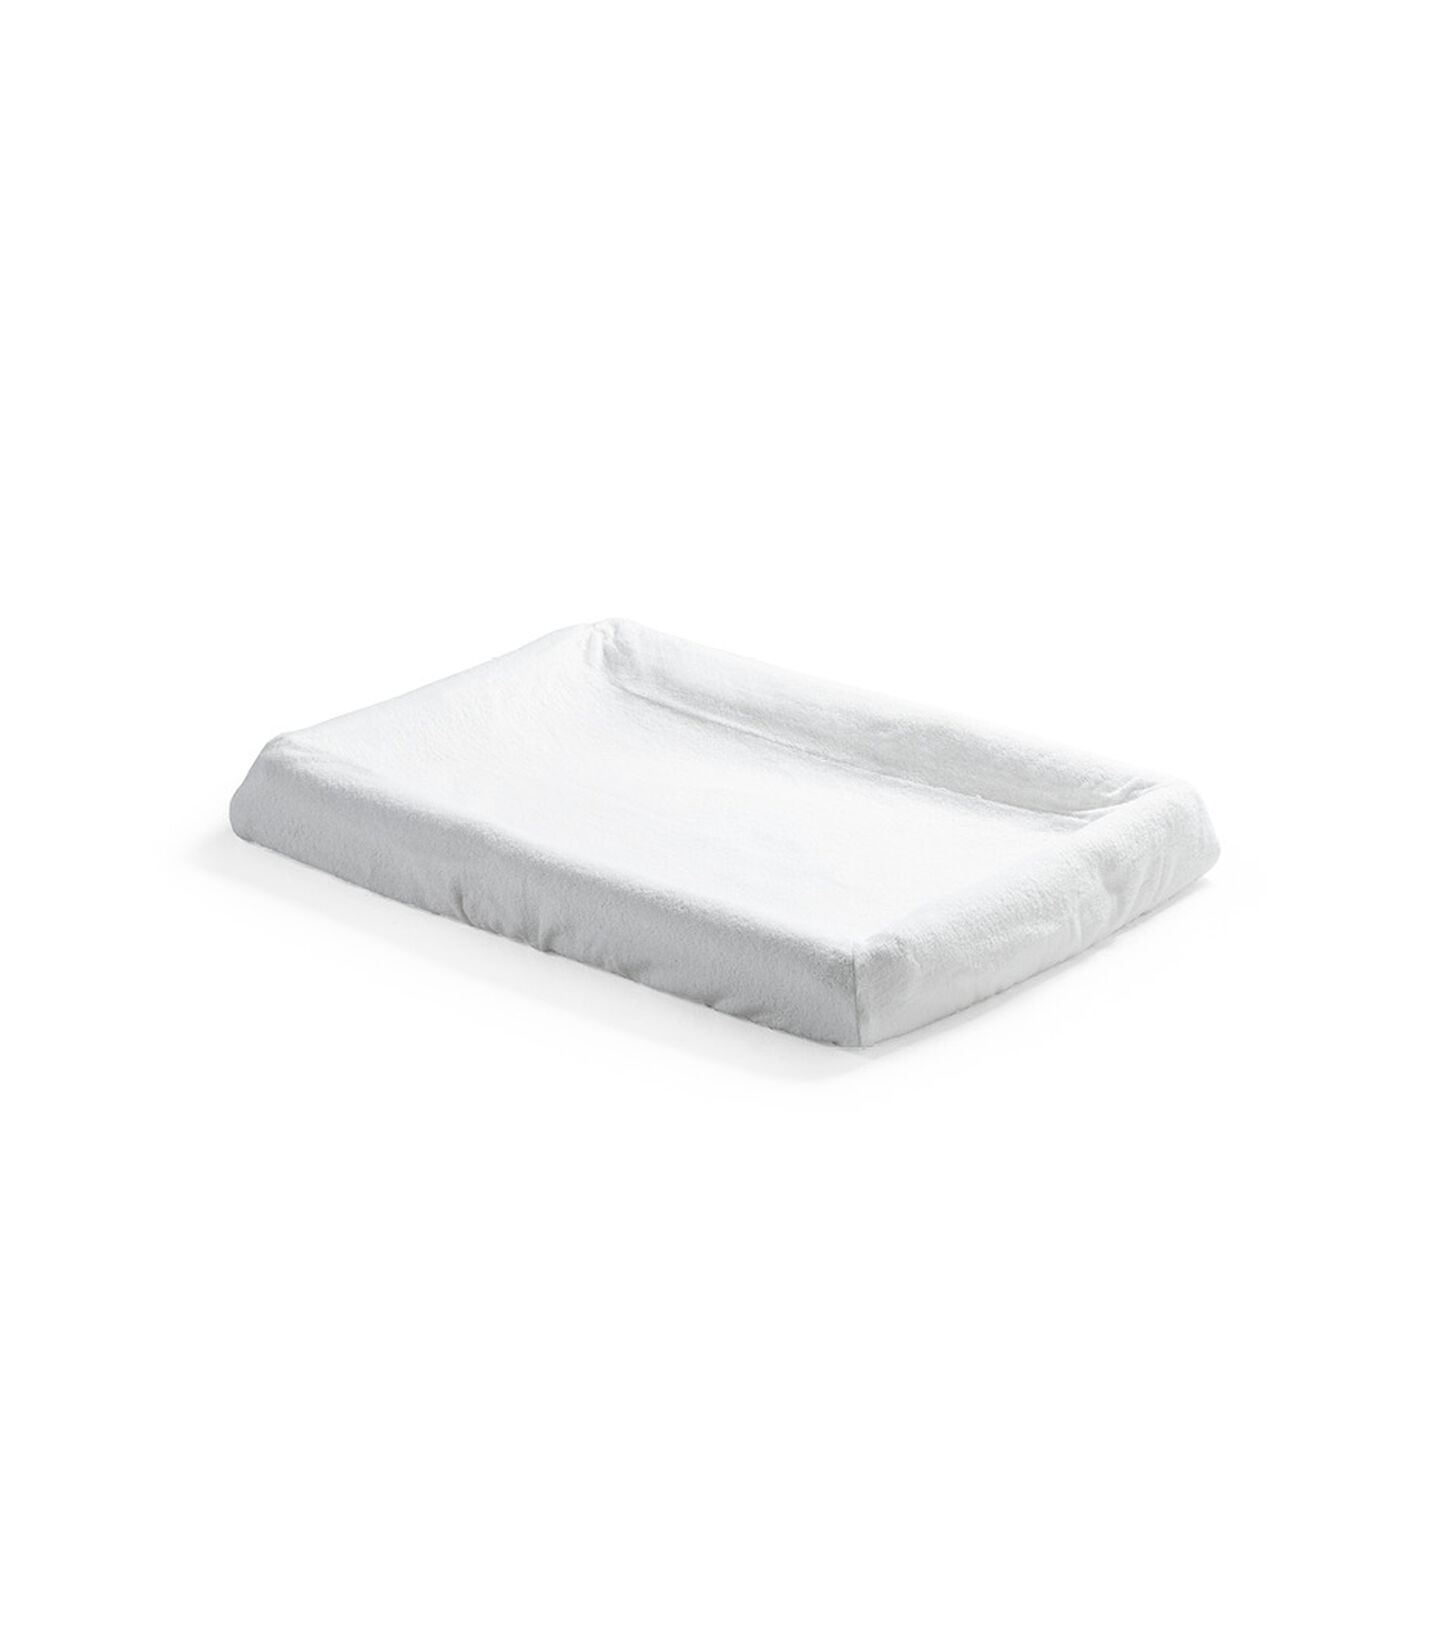 Stokke® Home™ Changer Mattress Cover. Sold separately. view 1